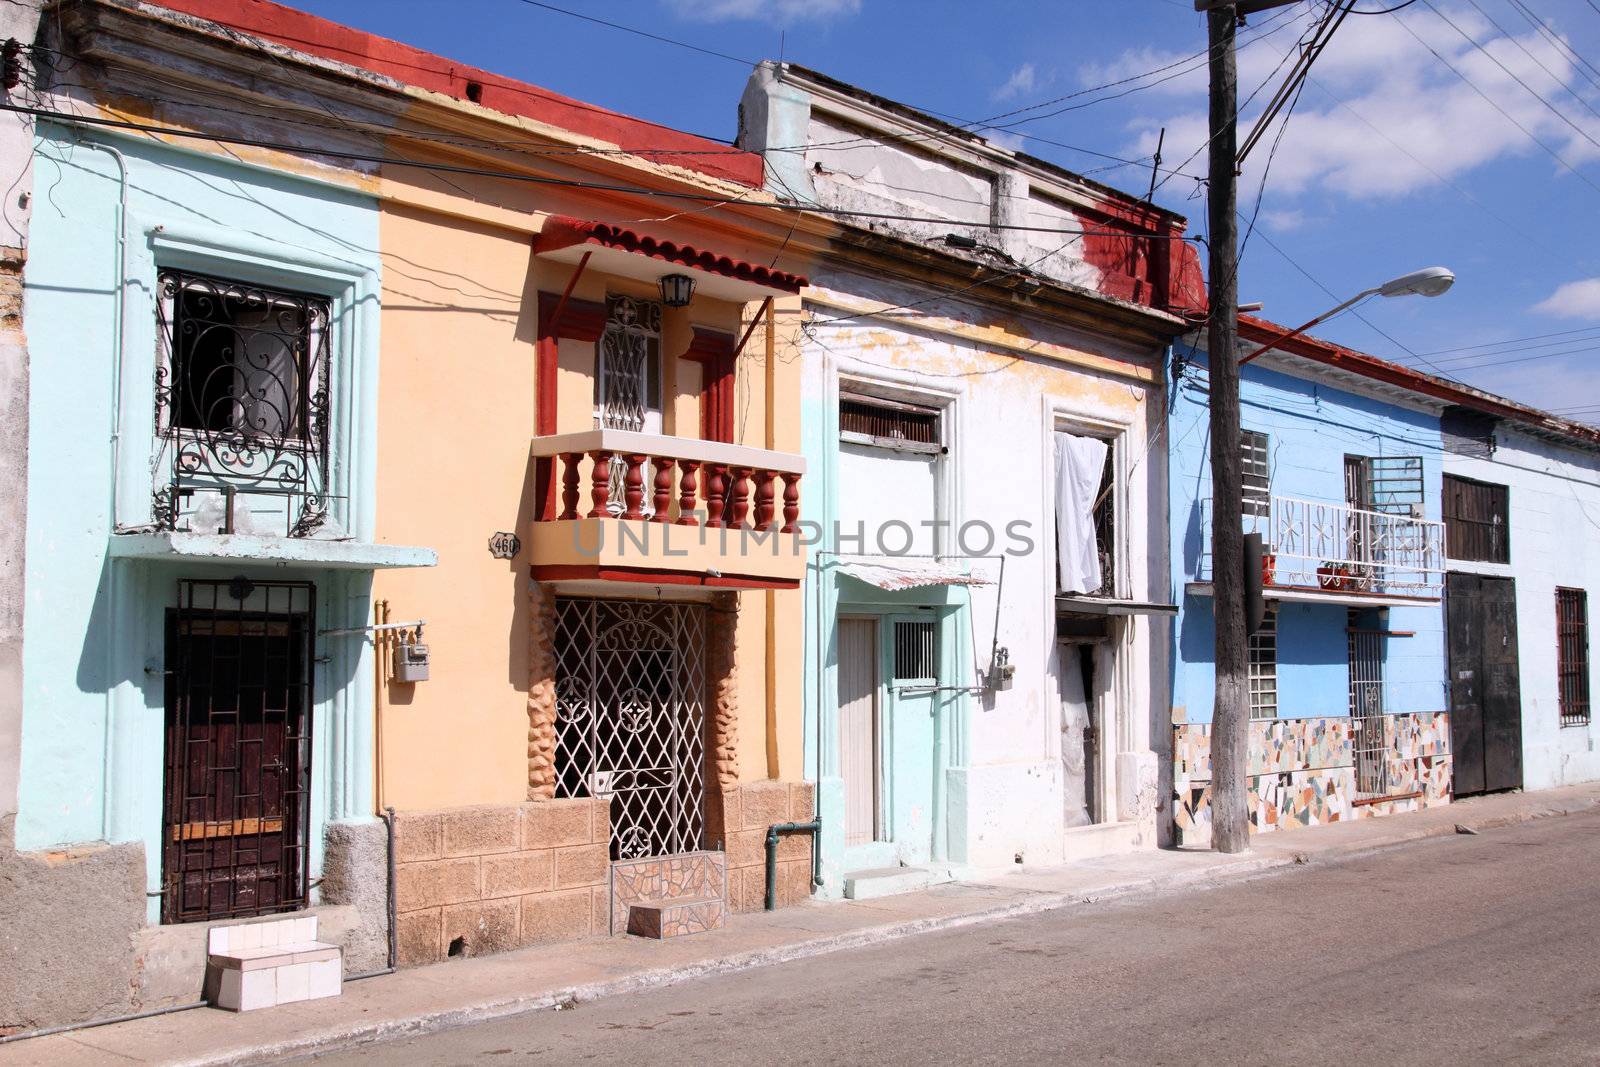 Havana, Cuba - typical residential architecture. Colorful street view.